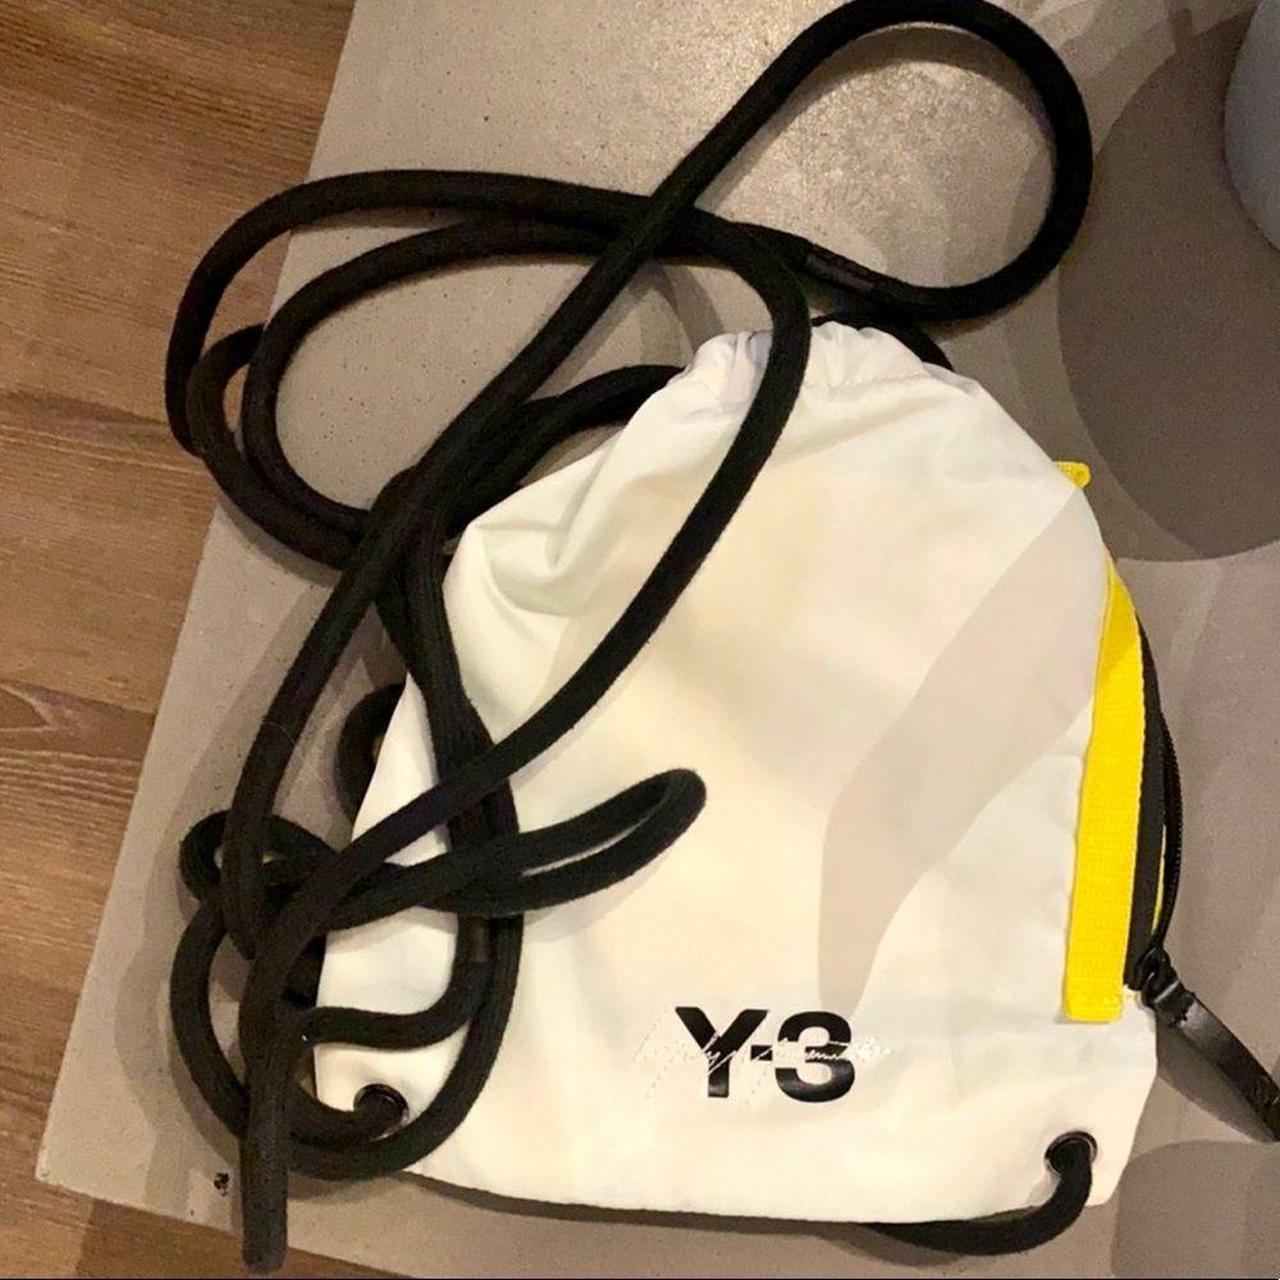 Y-3 Women's White and Yellow Bag